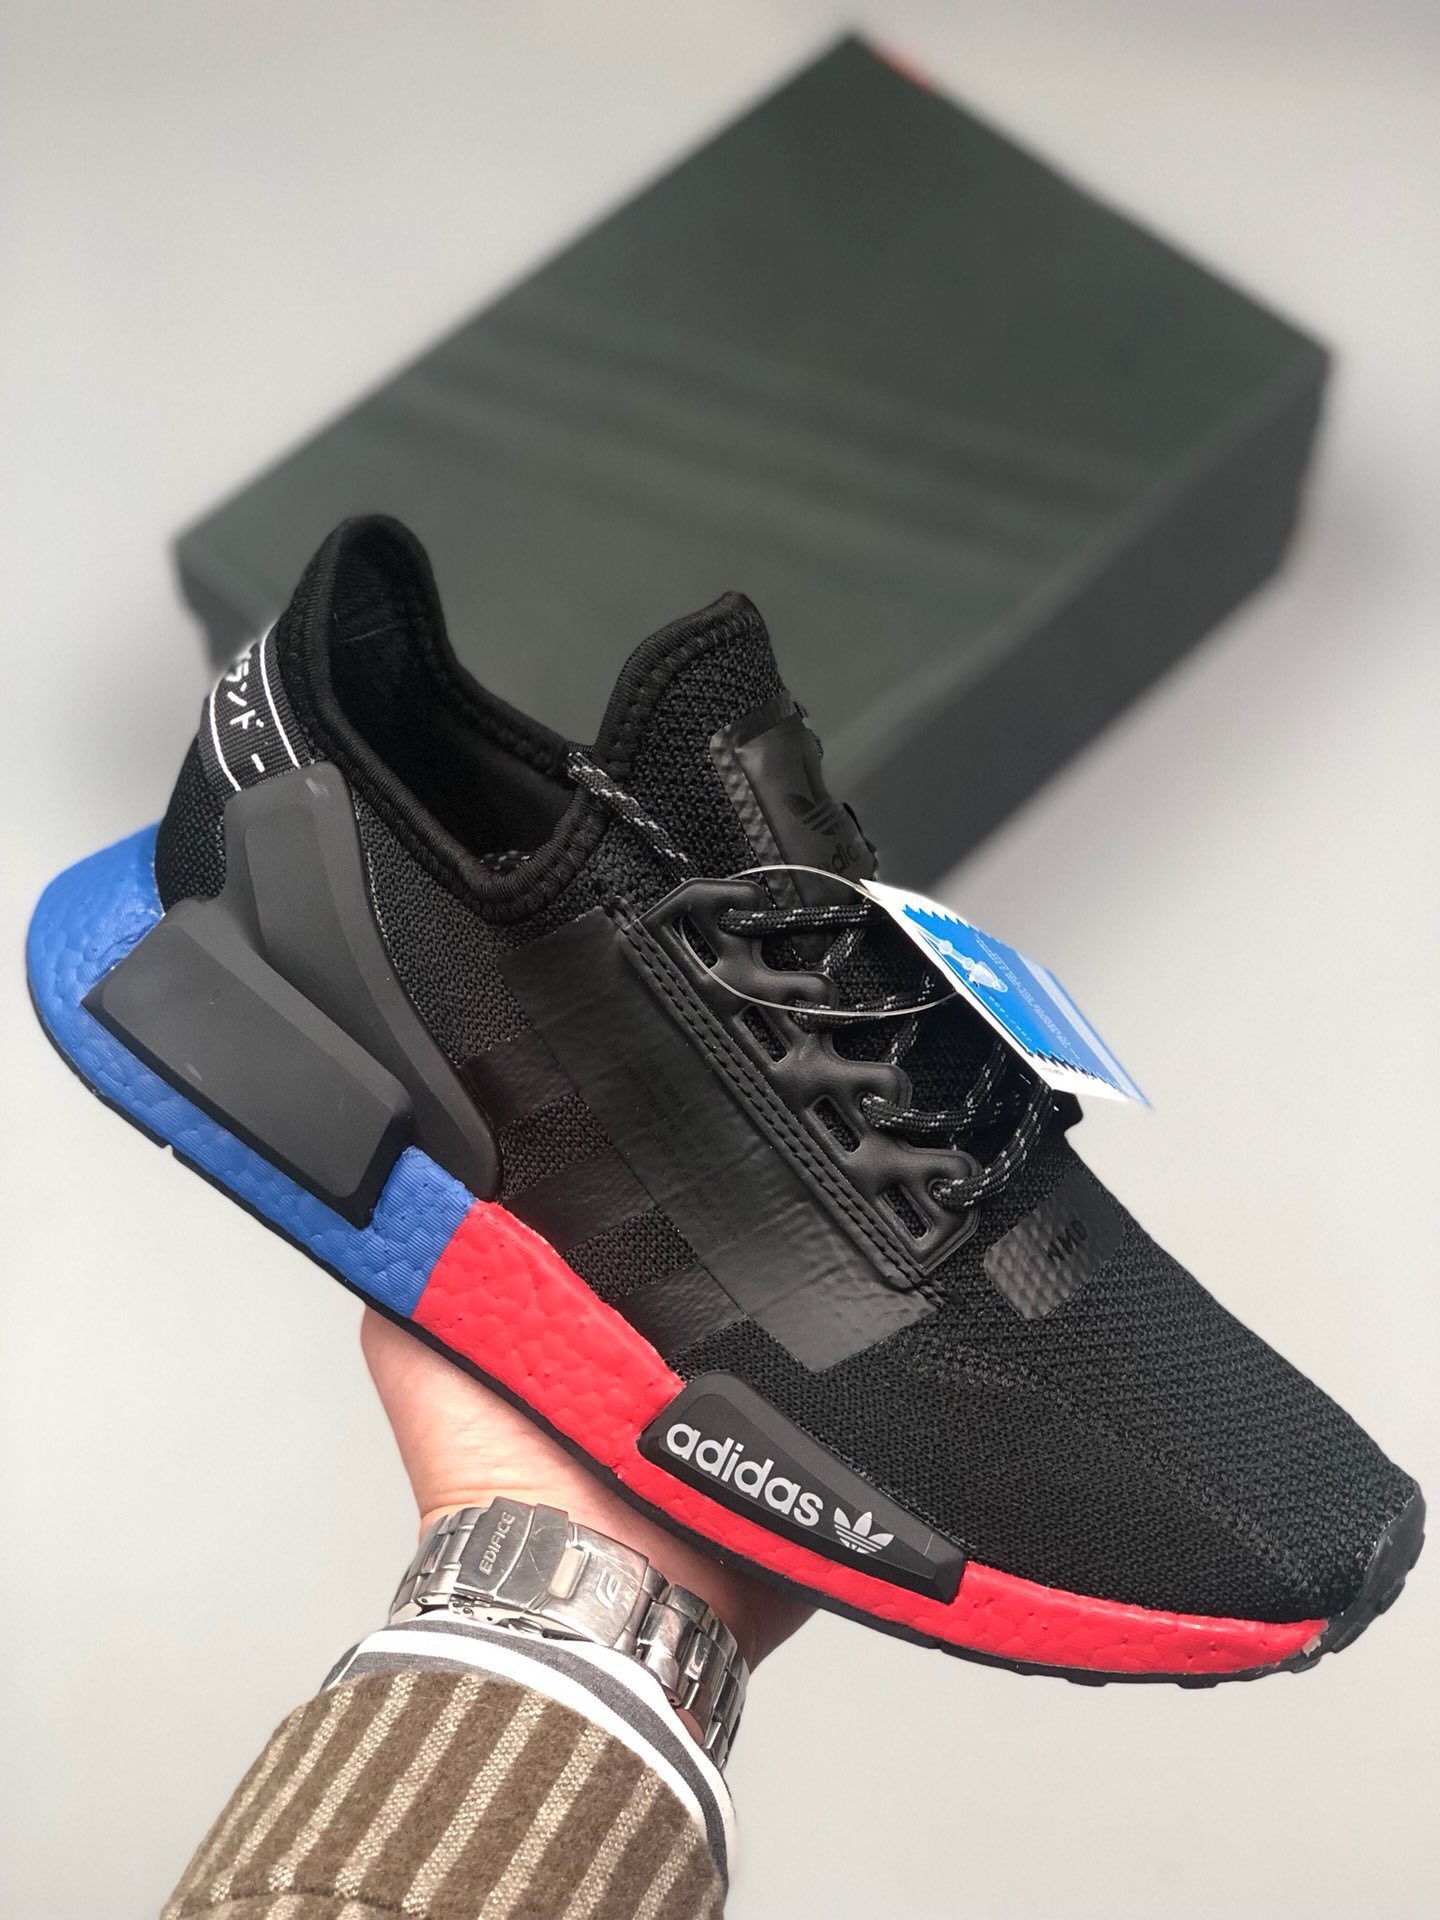 nmd adidas blue and red